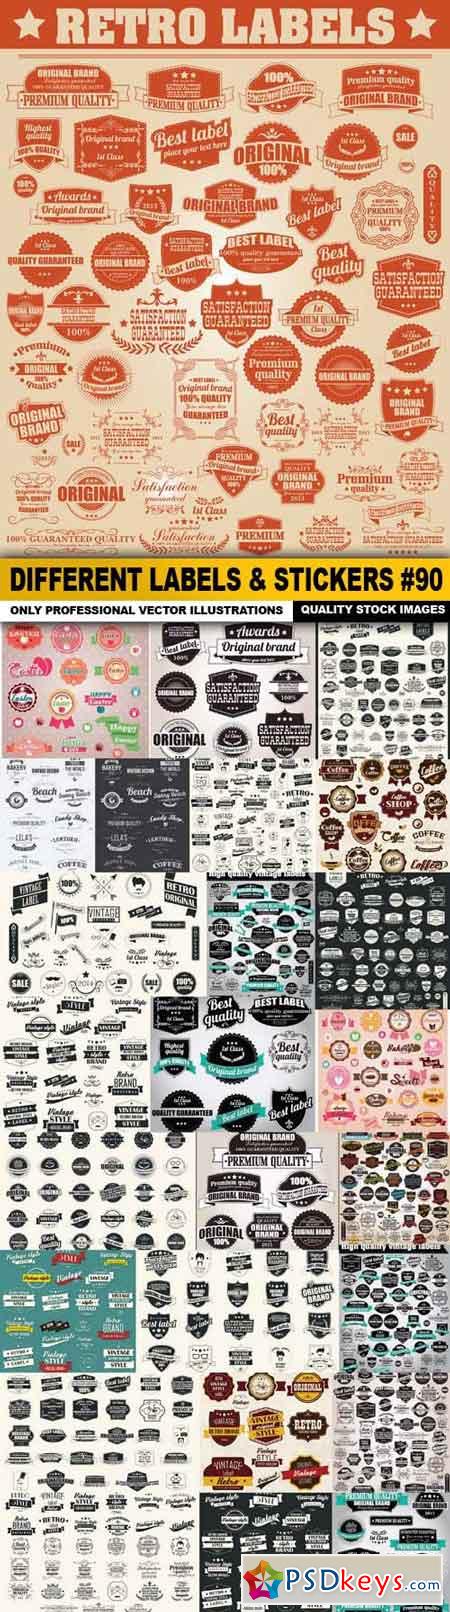 Different Labels & Stickers #90 - 25 Vector